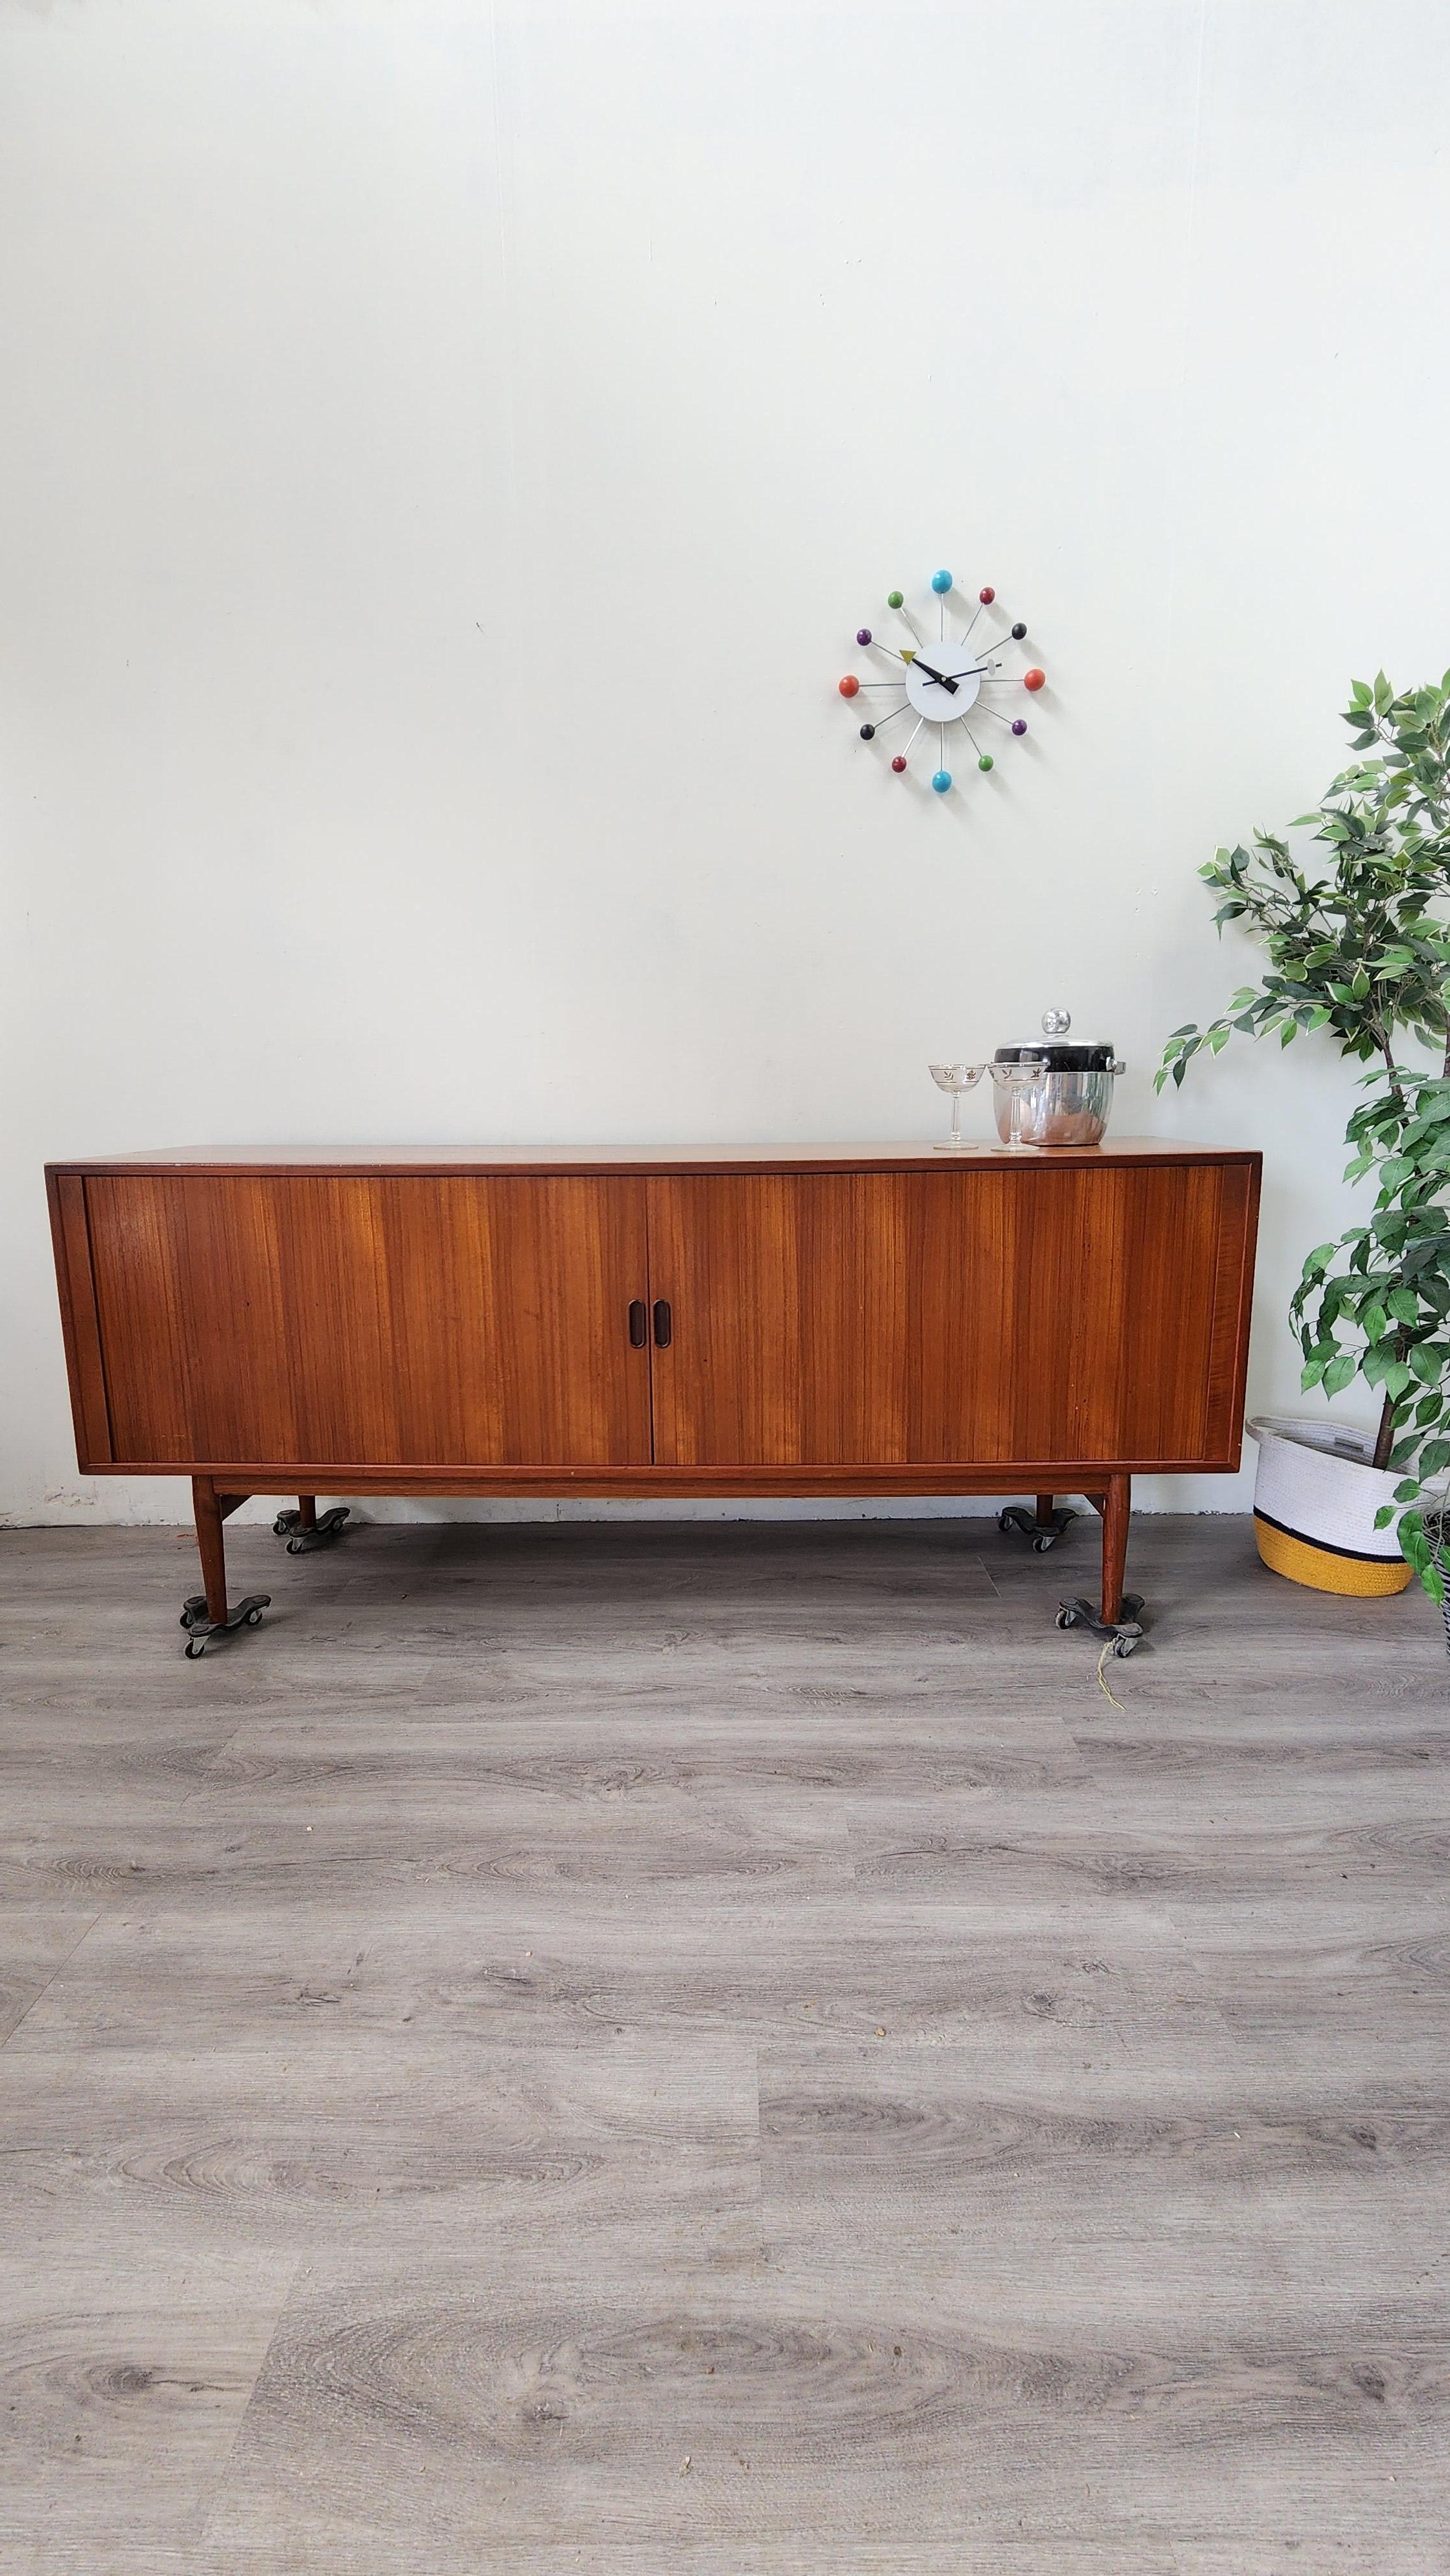 This beautiful teak credenza was designed by famed Danish designer Arne Vodder for Sibast Mobelfabrik. The tamboured doors were psinstcraftedv with perfectly matched veneer that slide away beautifully. 
Behind the tamboured doors is plenty of